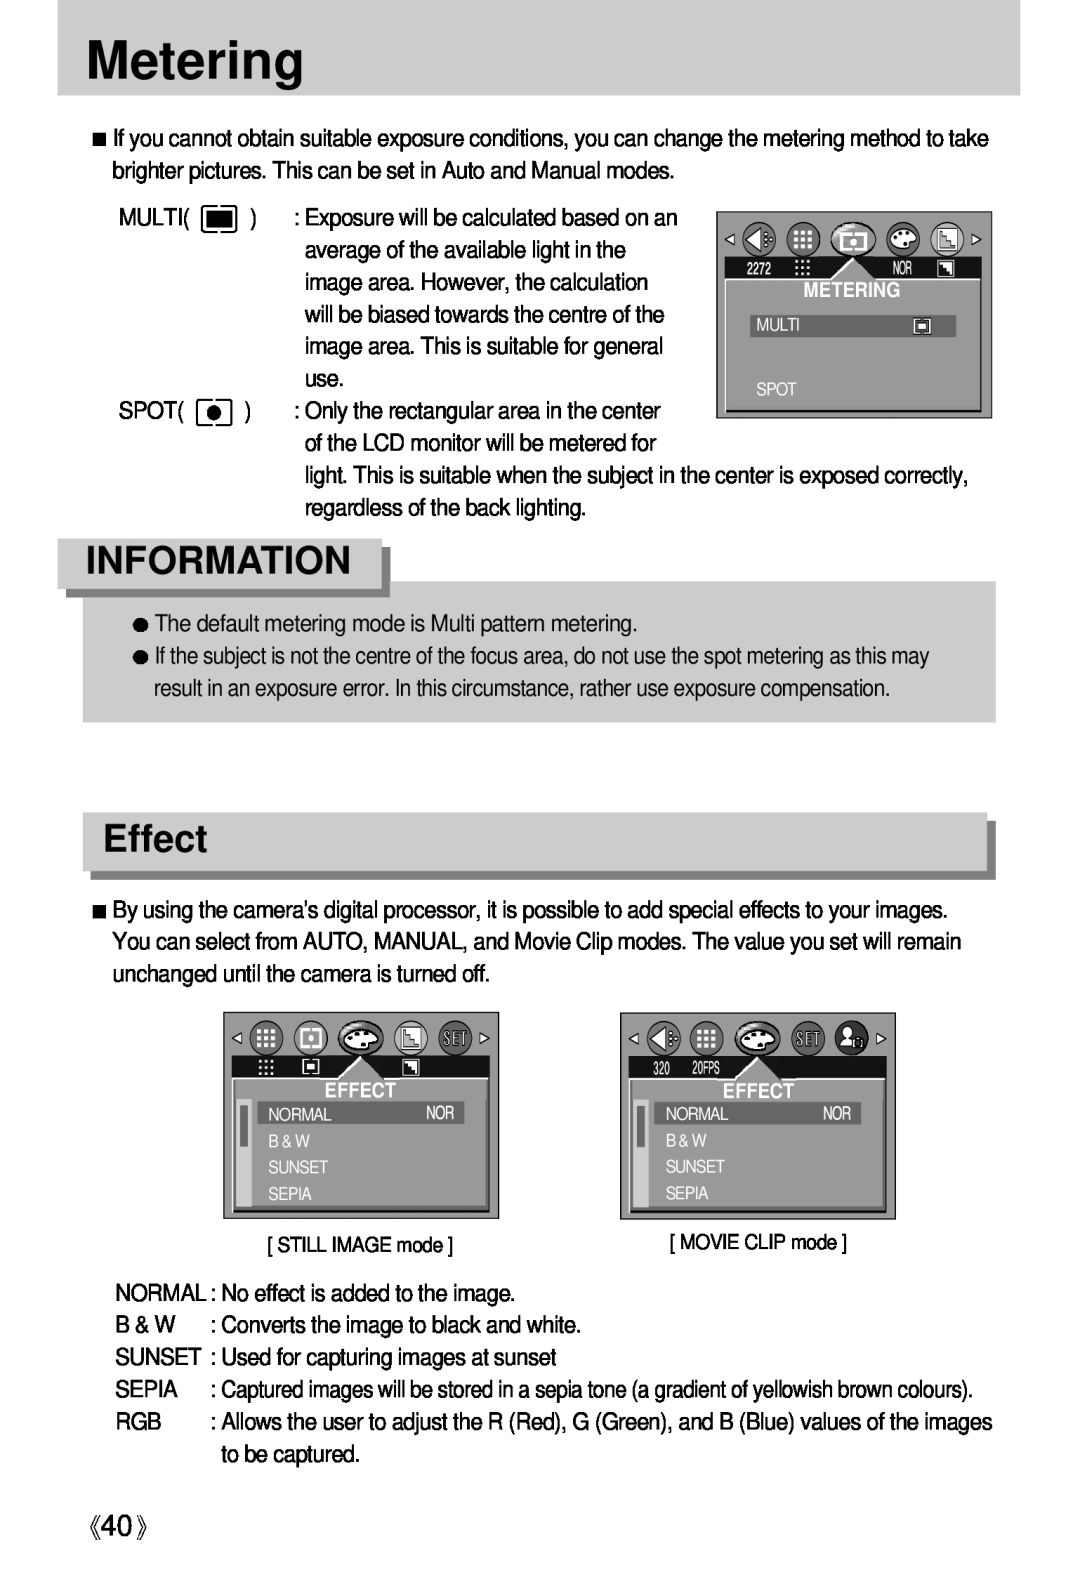 Samsung Digimax U-CA user manual Metering, Effect, Information, will be biased towards the centre of the 